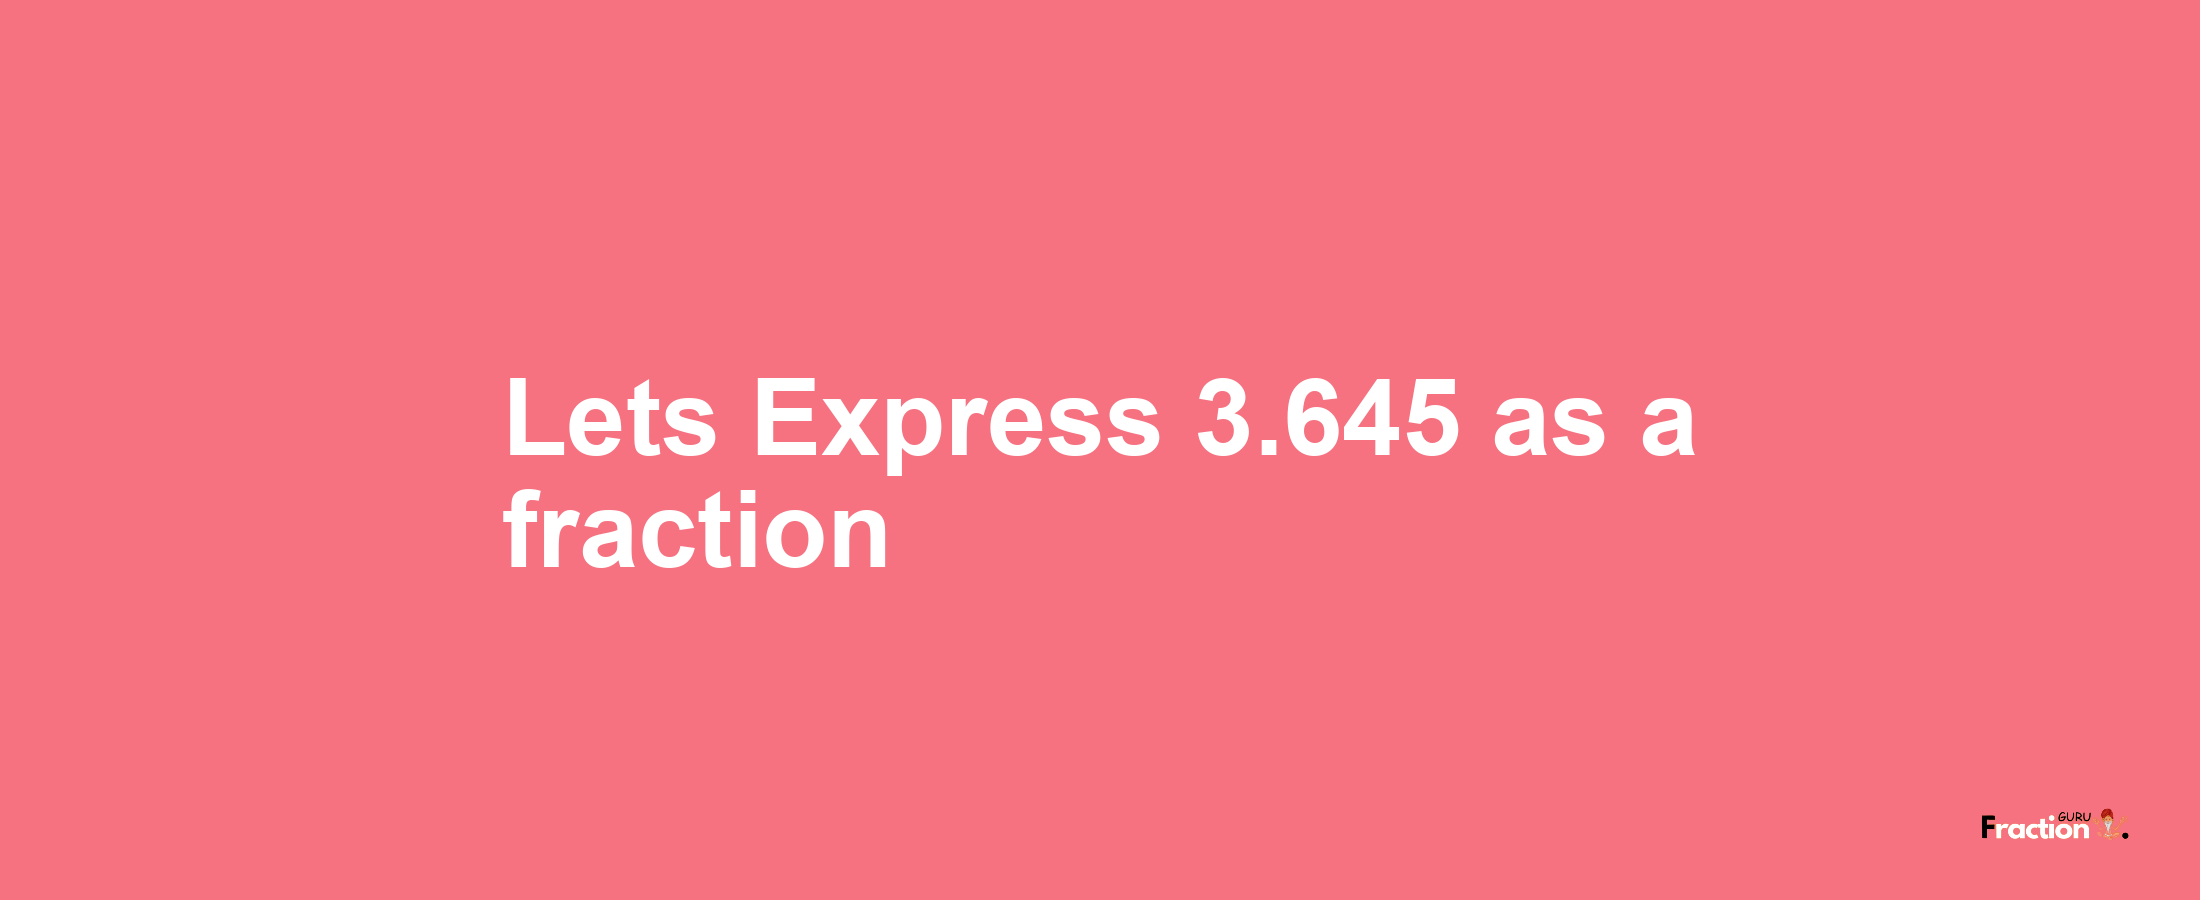 Lets Express 3.645 as afraction